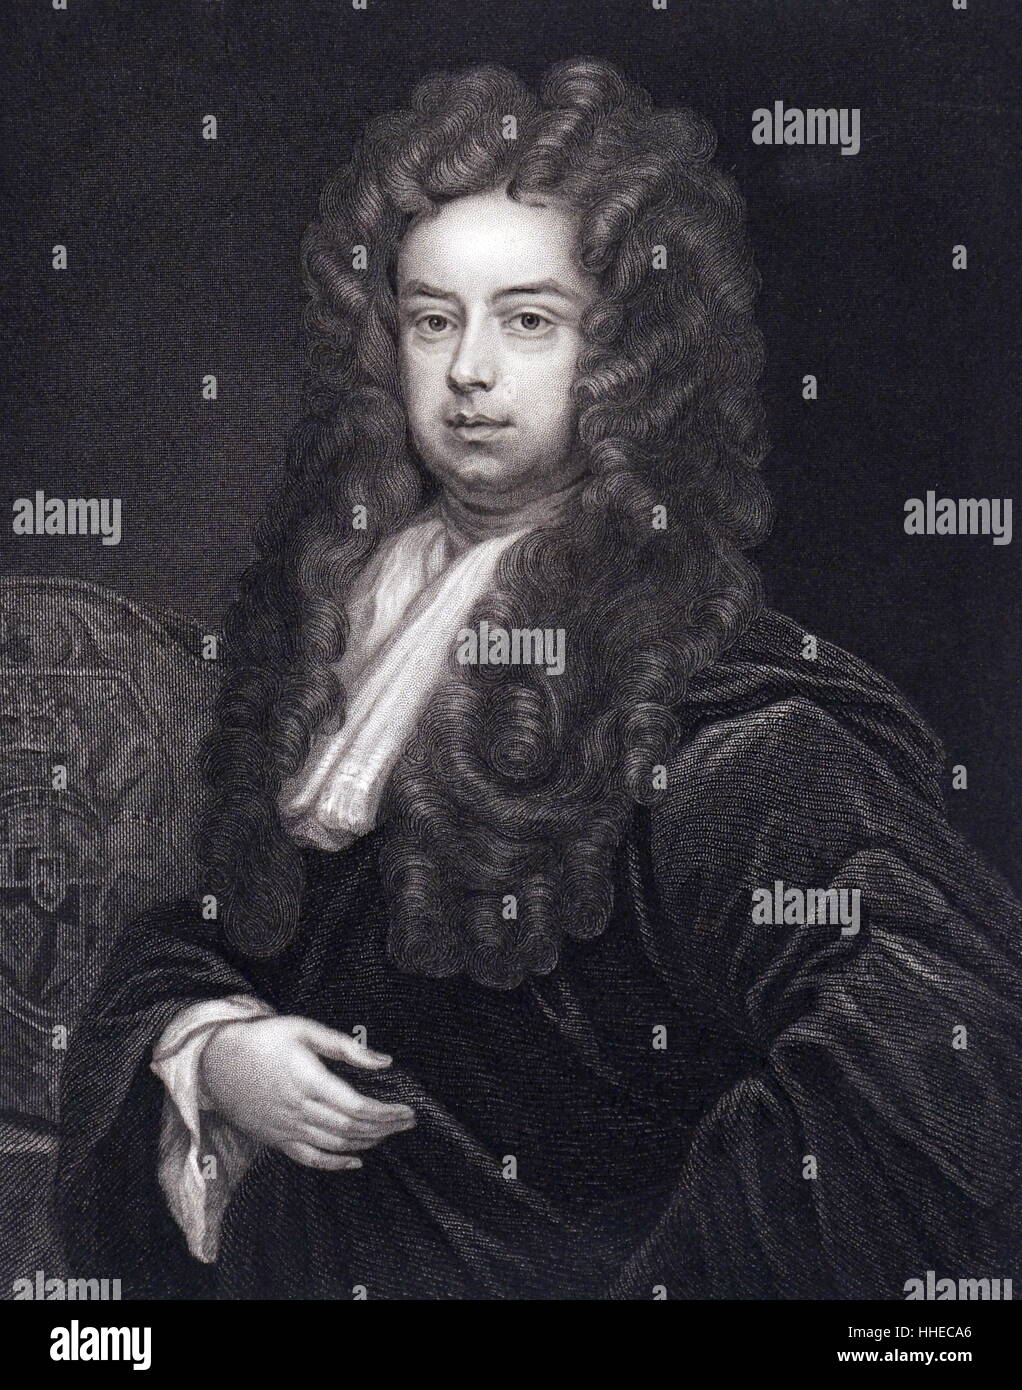 John Somers or Sommers (1651-1716) English lawyer and politician: Counsel for the seven bishops 1688. Lord Chancellor 1697. Friend and patron of poets and writers. Jonathan Swift dedicated Tale of a Tub 1704 to him. 1833 engraving after a portrait by Godfrey Kneller Stock Photo